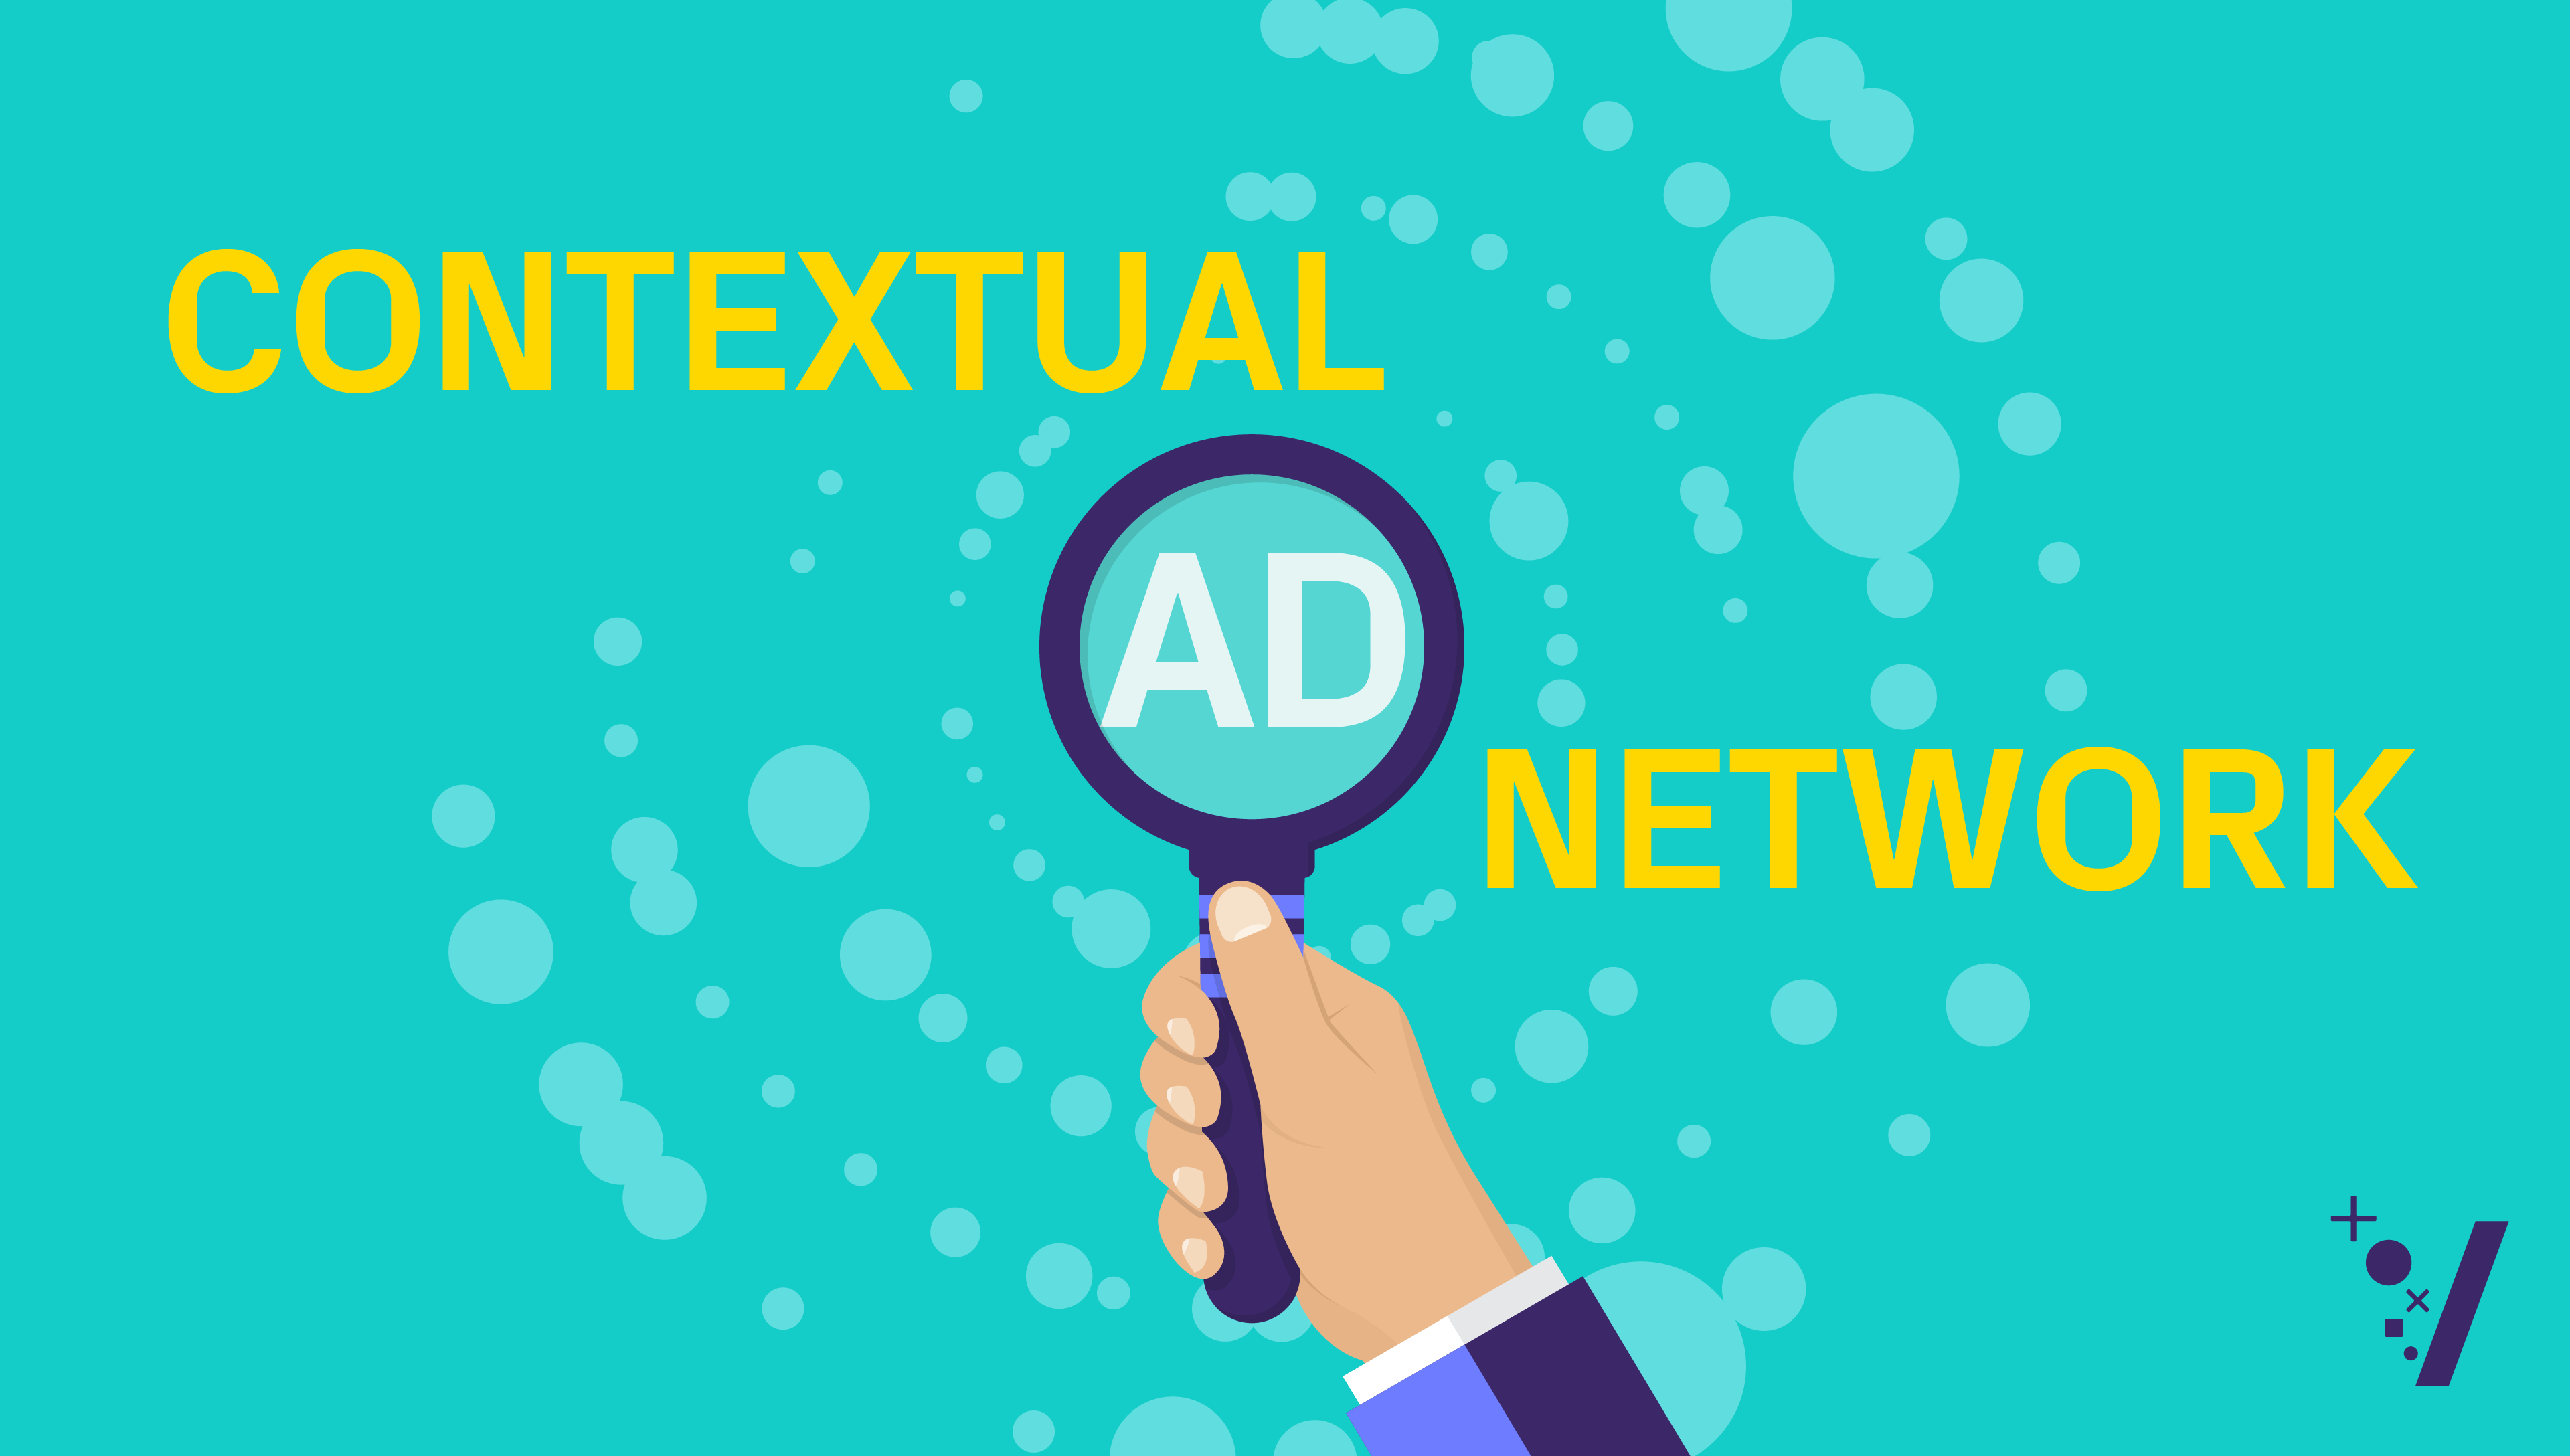 What Is a Contextual Ad Network?